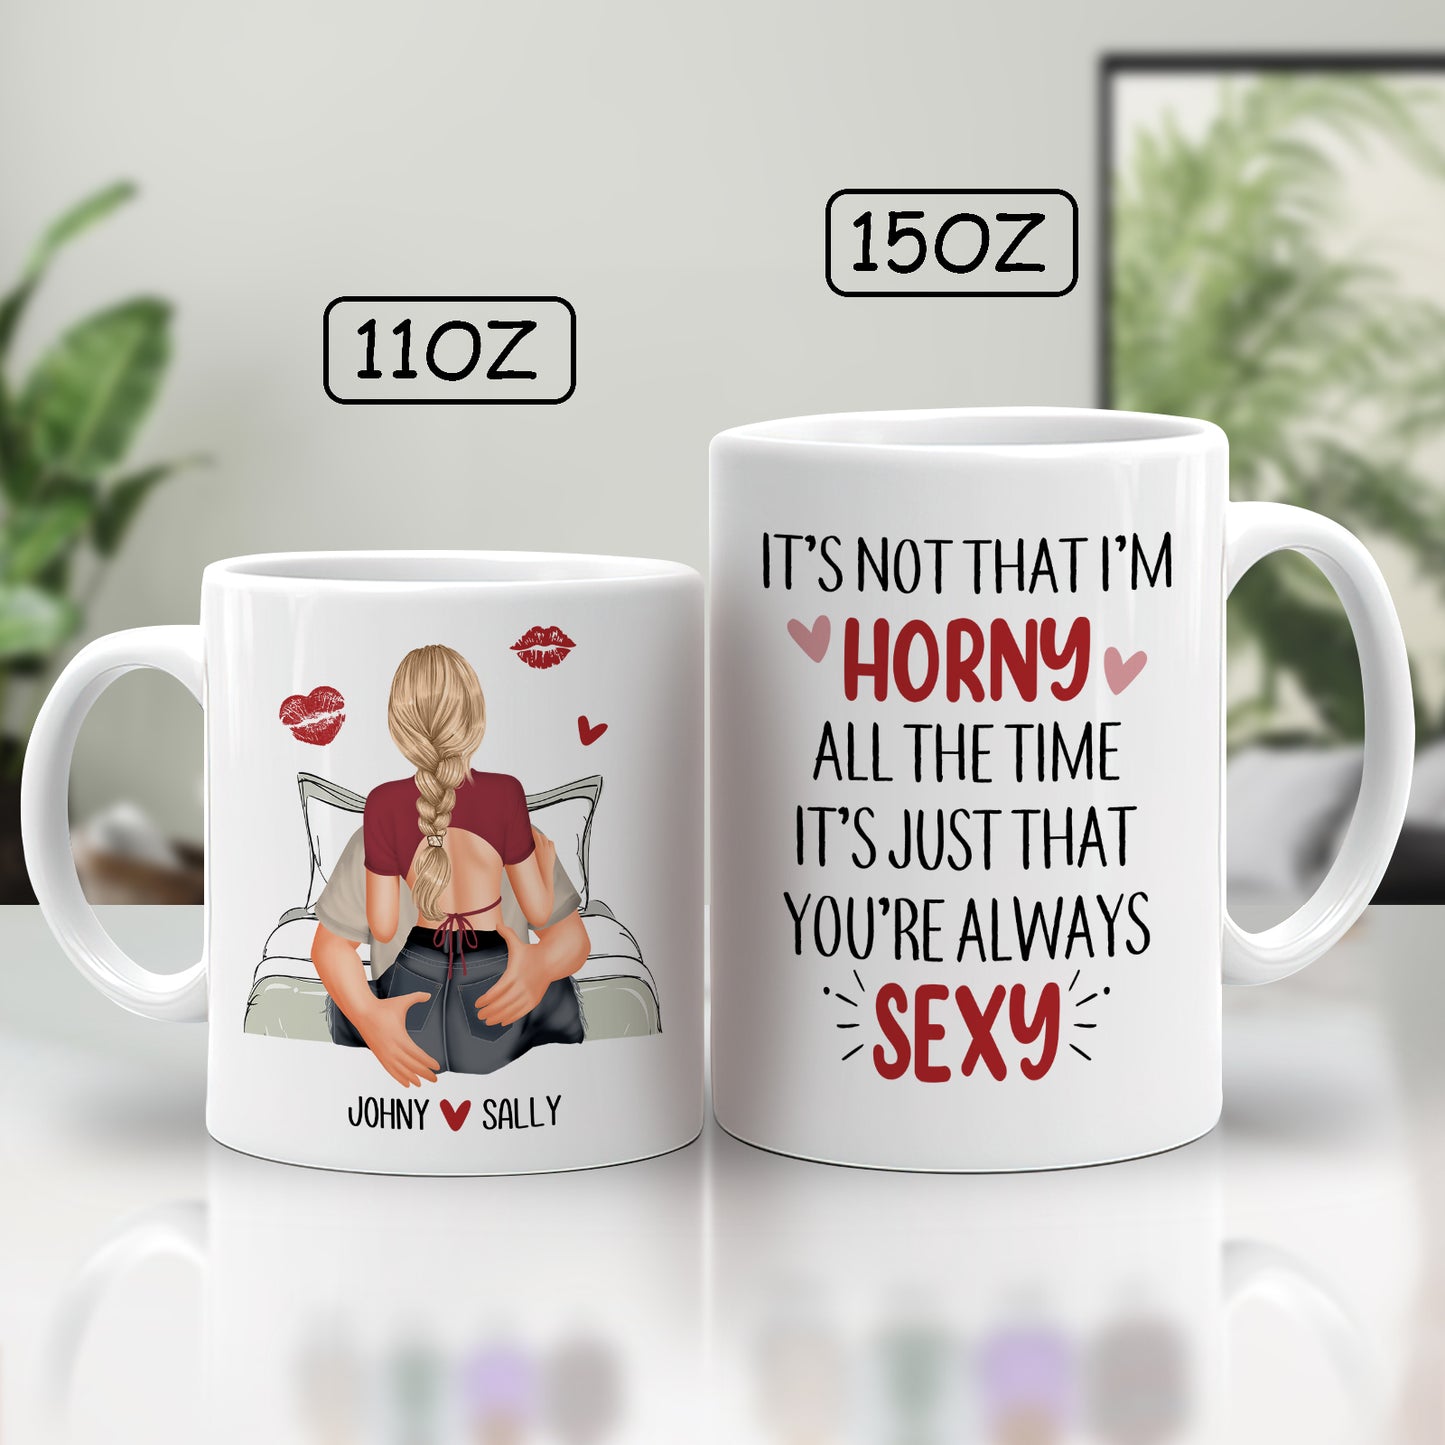 Couple - Personalized Mug - Valentine's Day Gifts For Her, Wife, Girlfriend